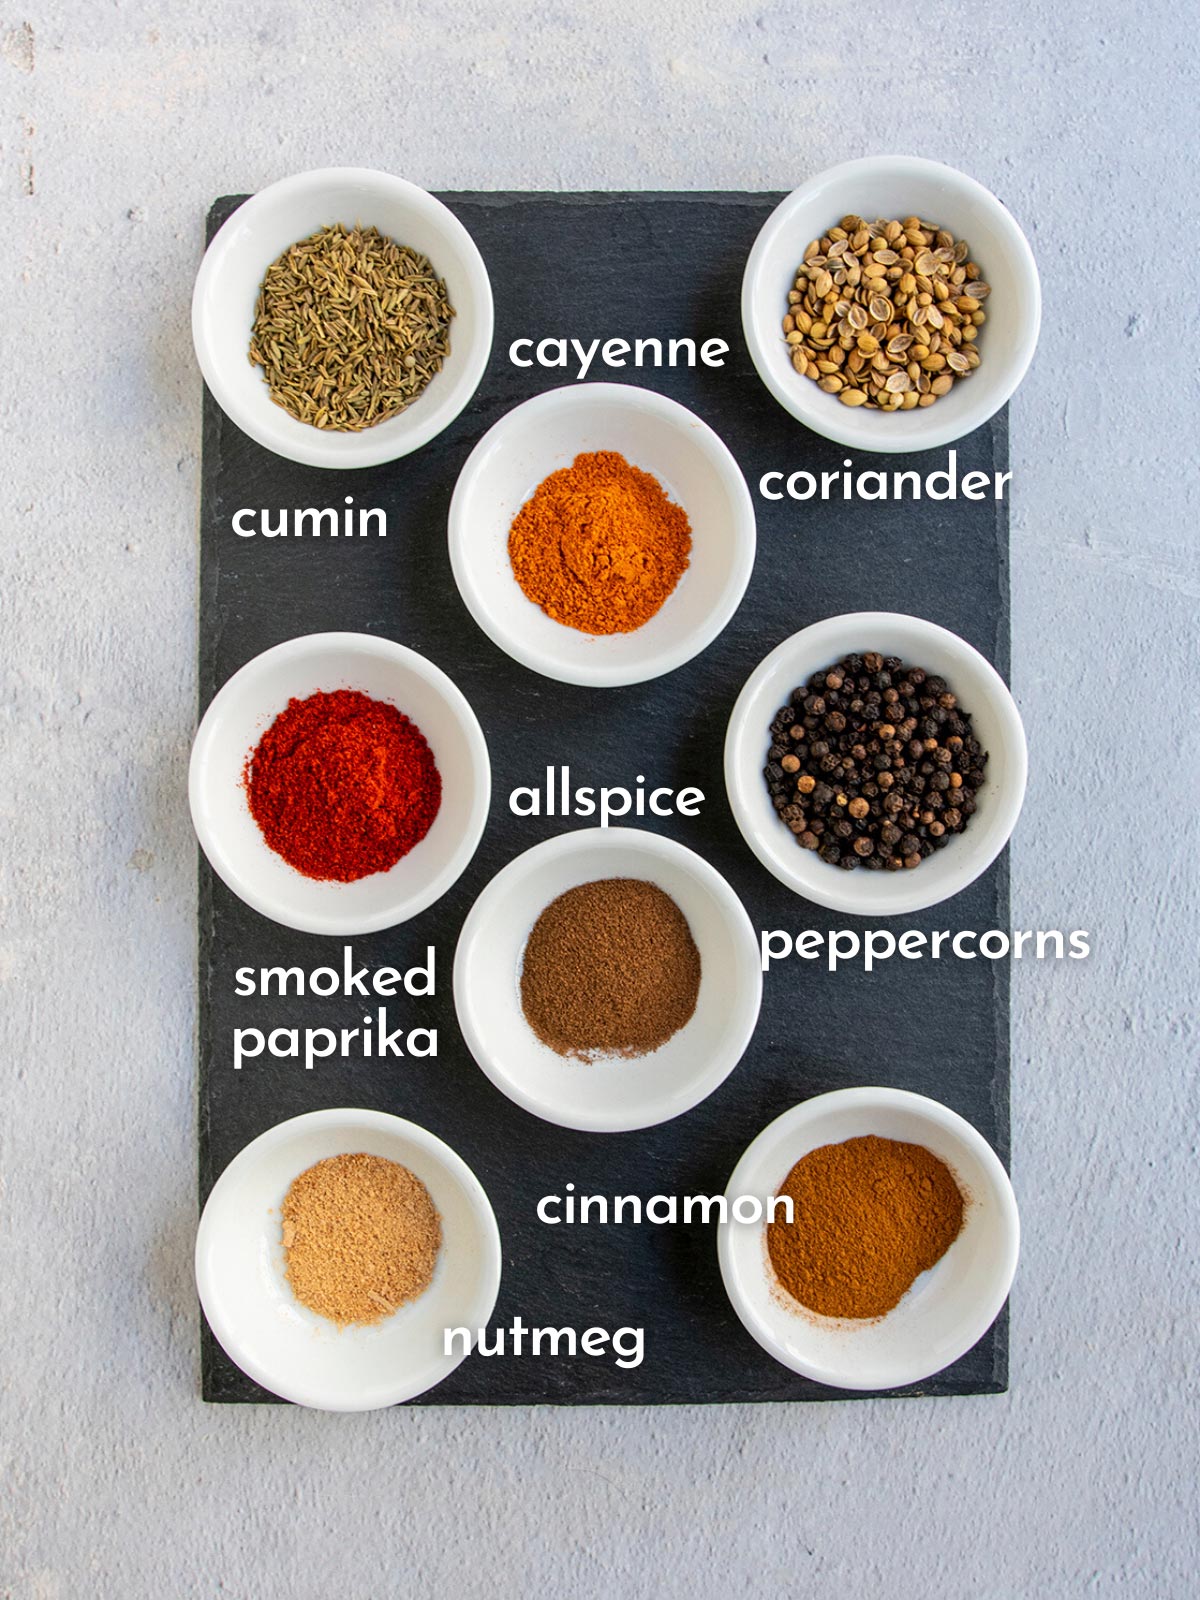 Ingredient shot showing all spices needed for baharat seasoning.